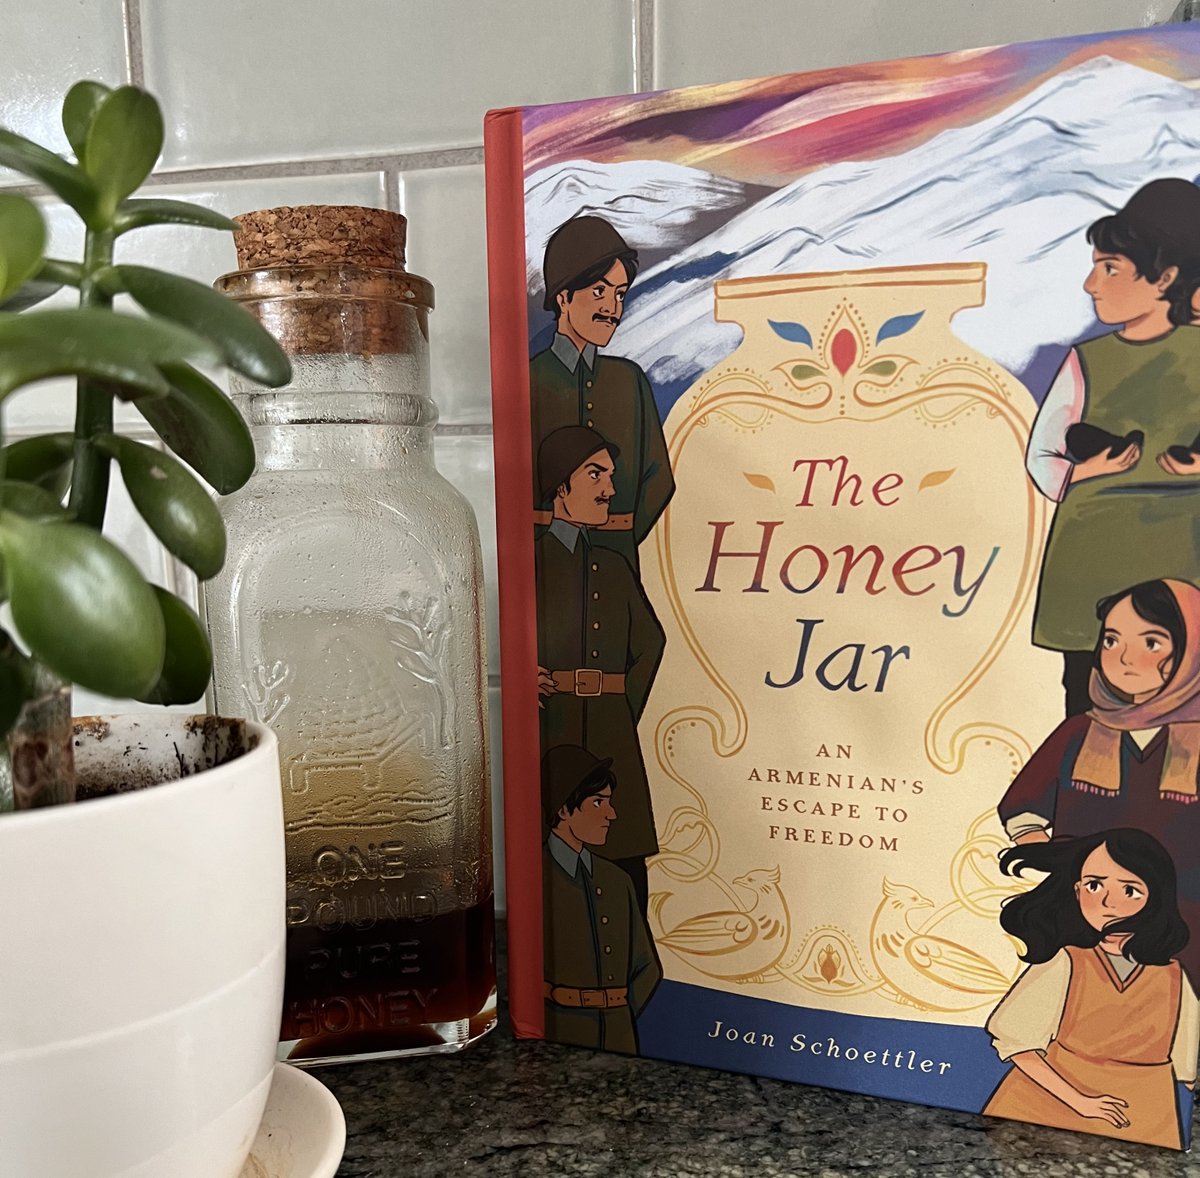 I'm sure those 4th grade students were fascinated and engaged by THE HONEY JAR! #middlegradenovel